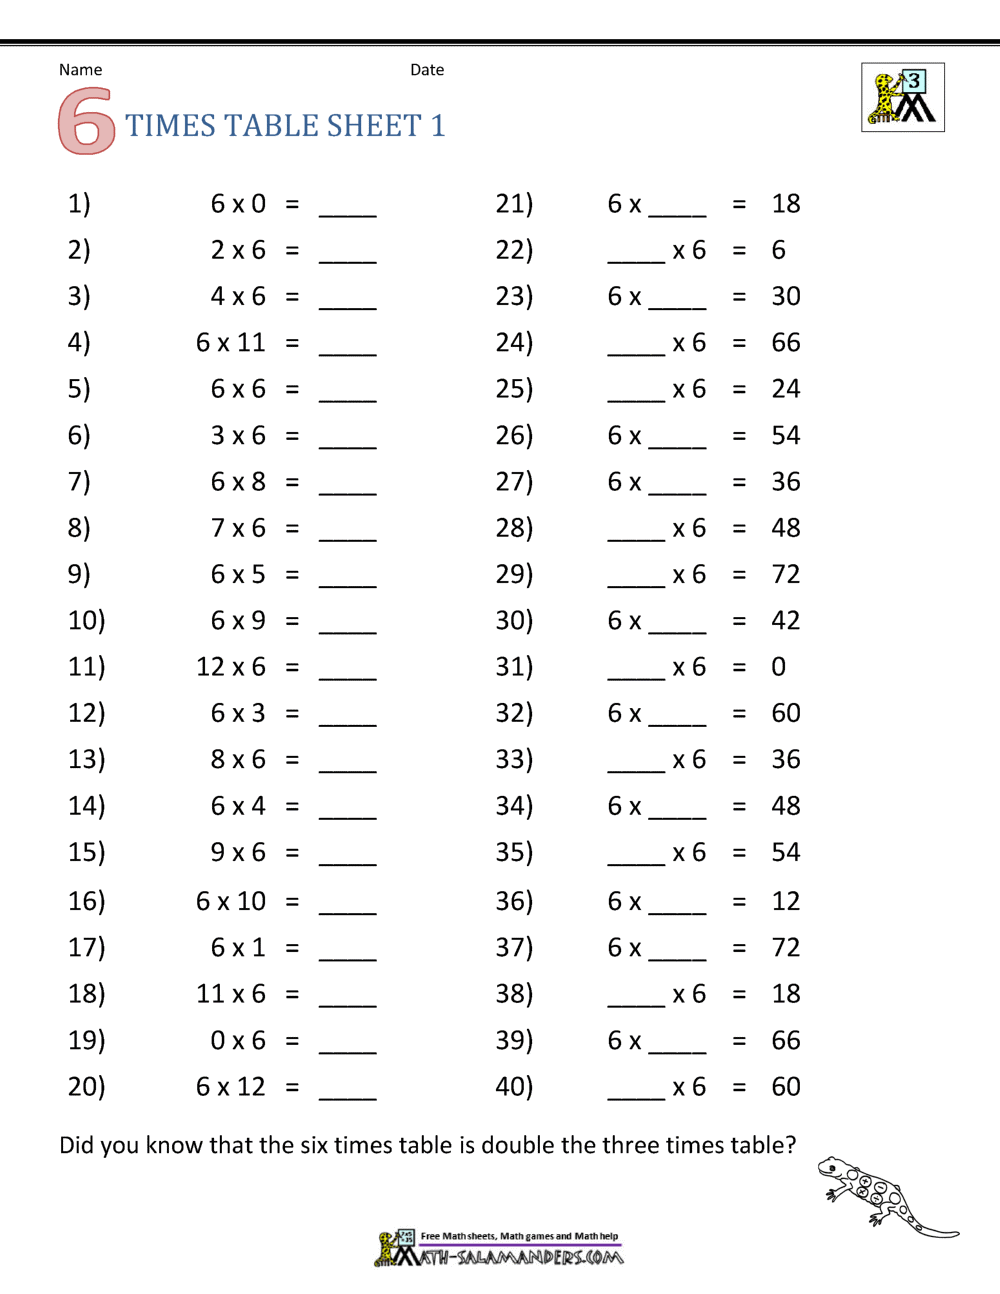 Multiplication Drill Sheets 11rd Grade With Regard To Multiplying By 6 Worksheet